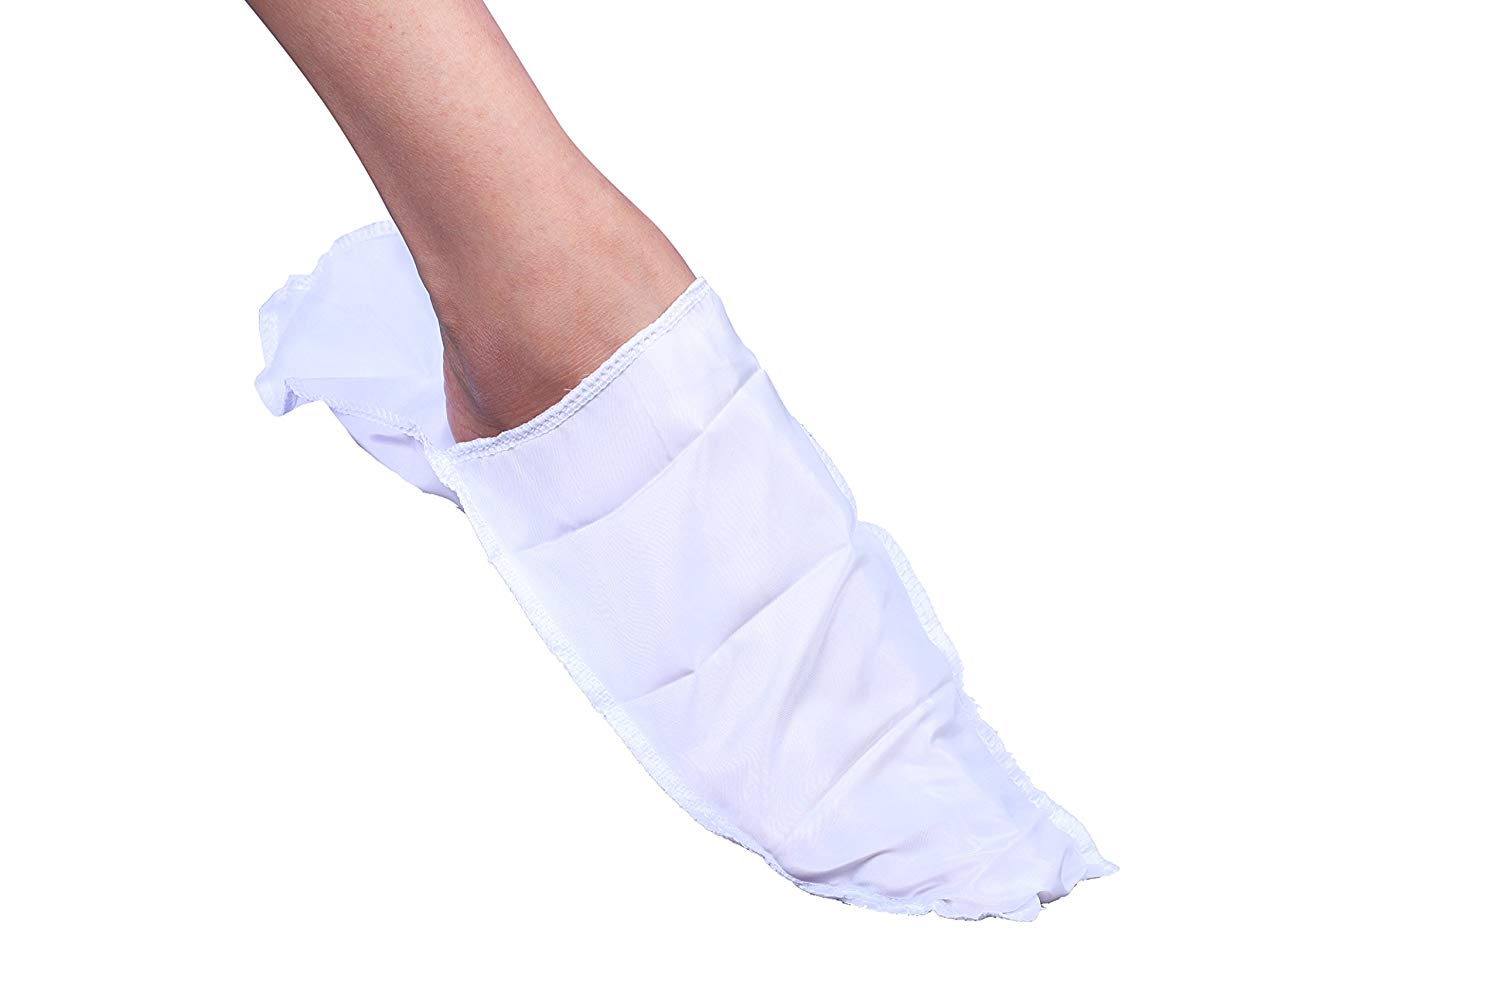 Sorgen Glider - Wearing Aid for open toe compression stockings - Sorgen.Co